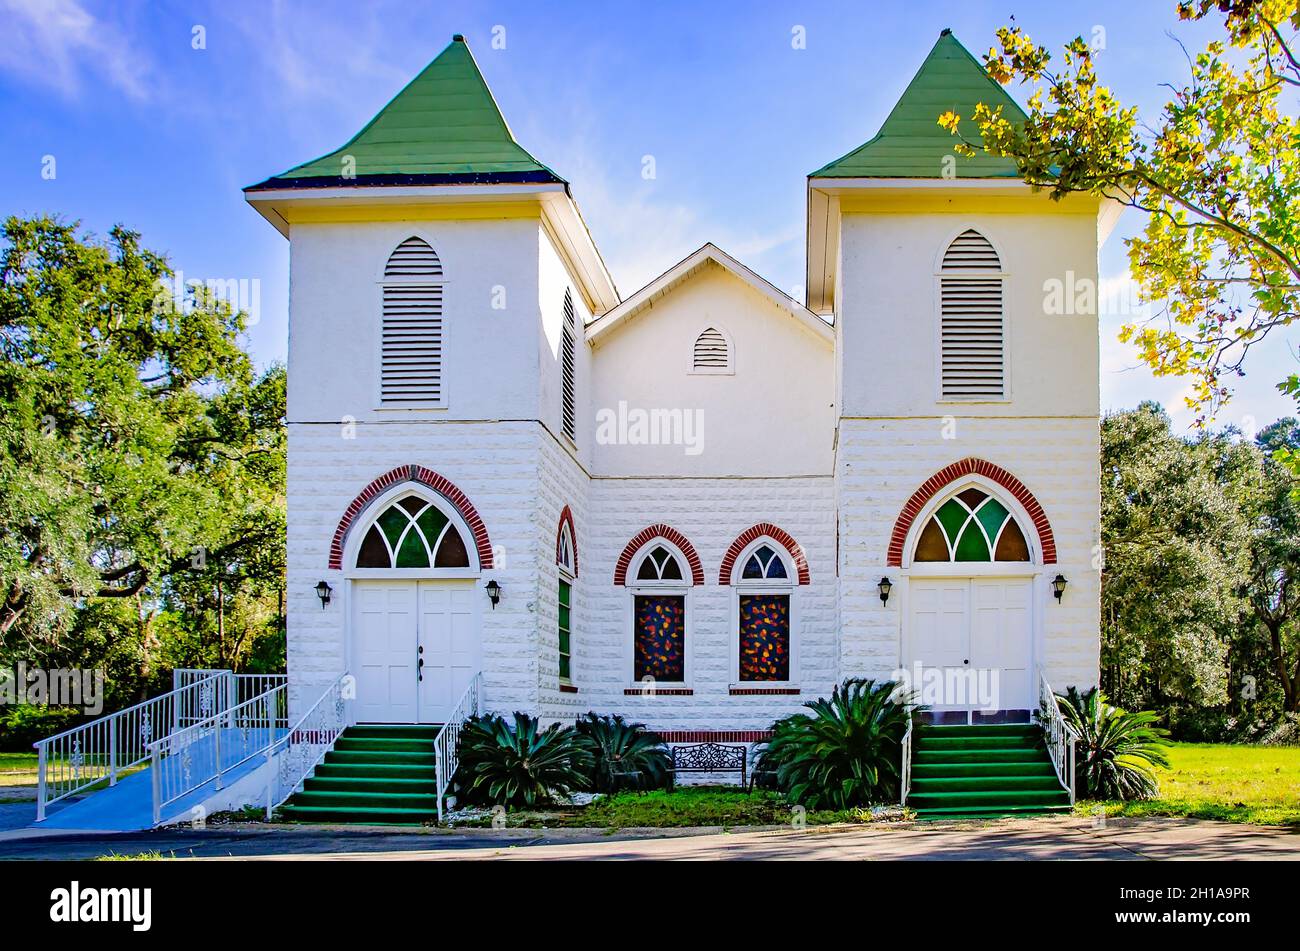 Twin Beech AME Zion Church is pictured, Oct. 16, 2021, in Fairhope, Alabama. The church was built in 1925 by architect Axal Johnson. Stock Photo